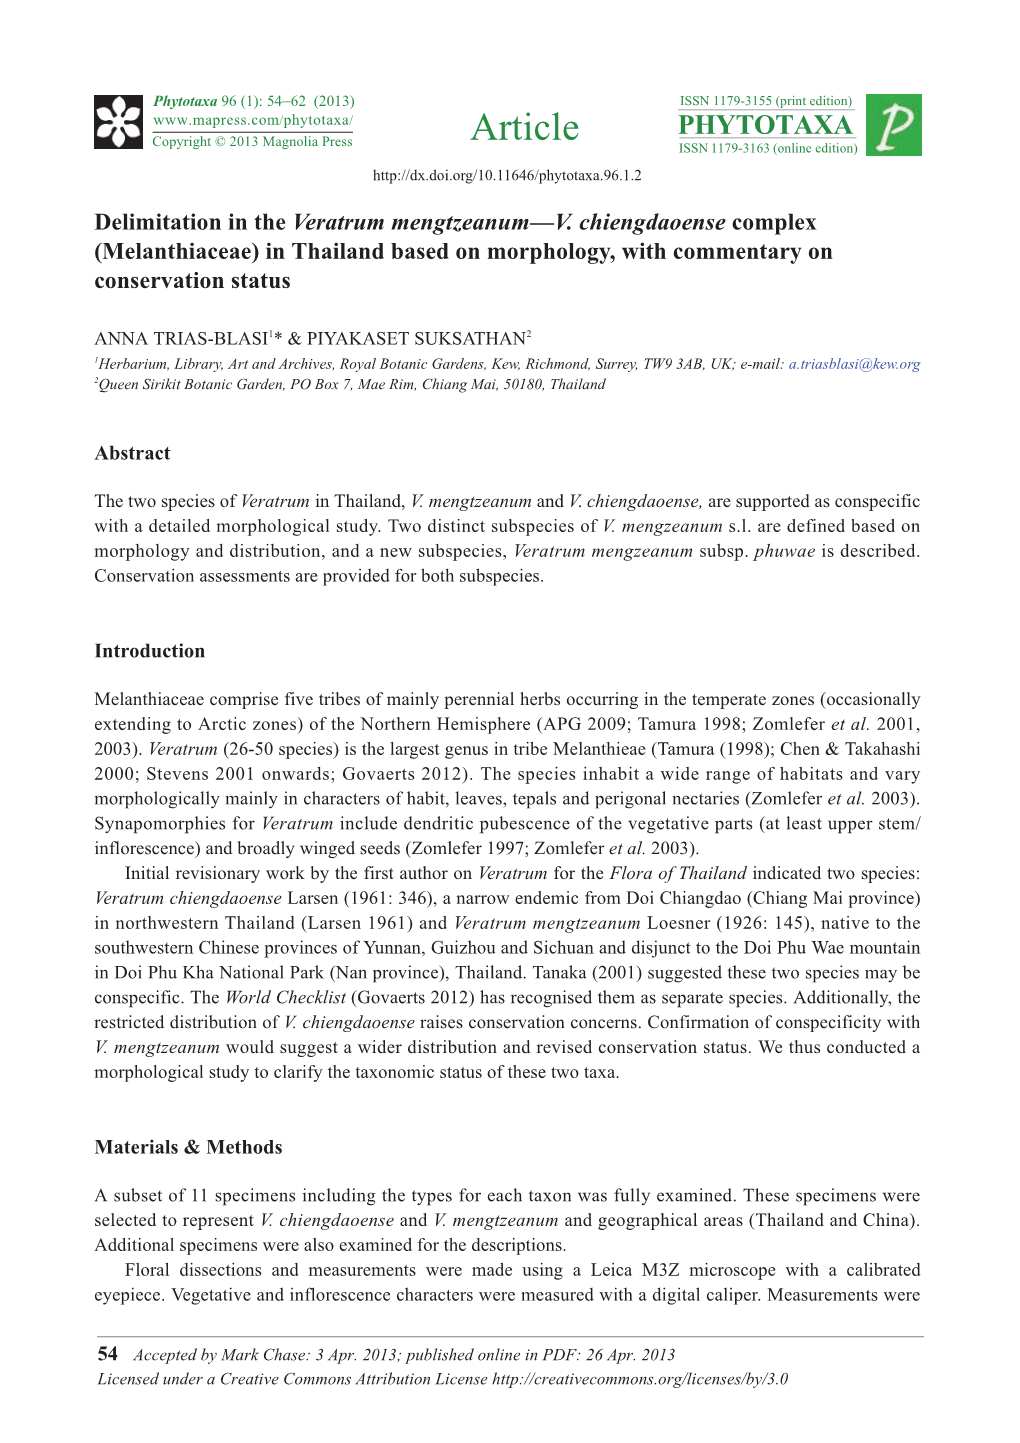 Melanthiaceae) in Thailand Based on Morphology, with Commentary on Conservation Status